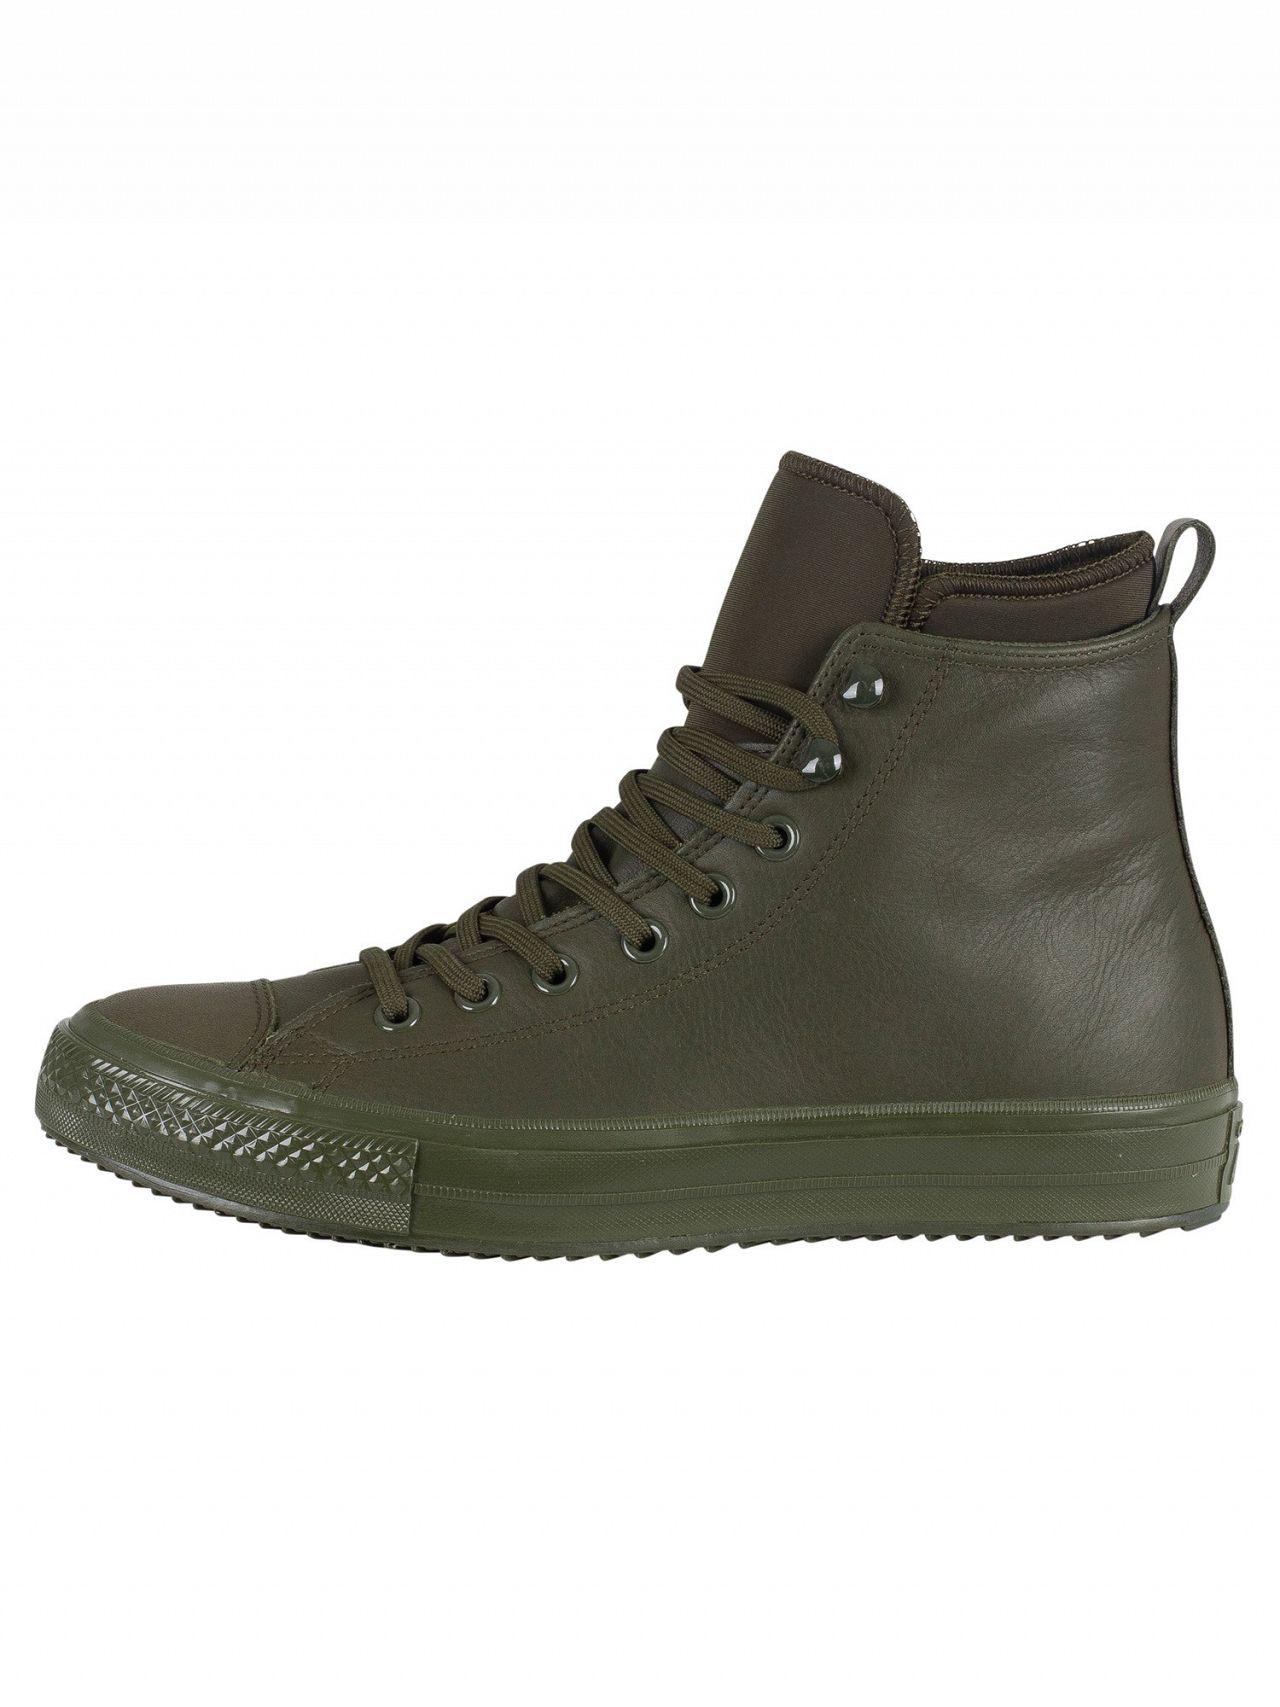 Converse Utility Green Ct All Star Hi Wp Leather Boots for Men - Lyst